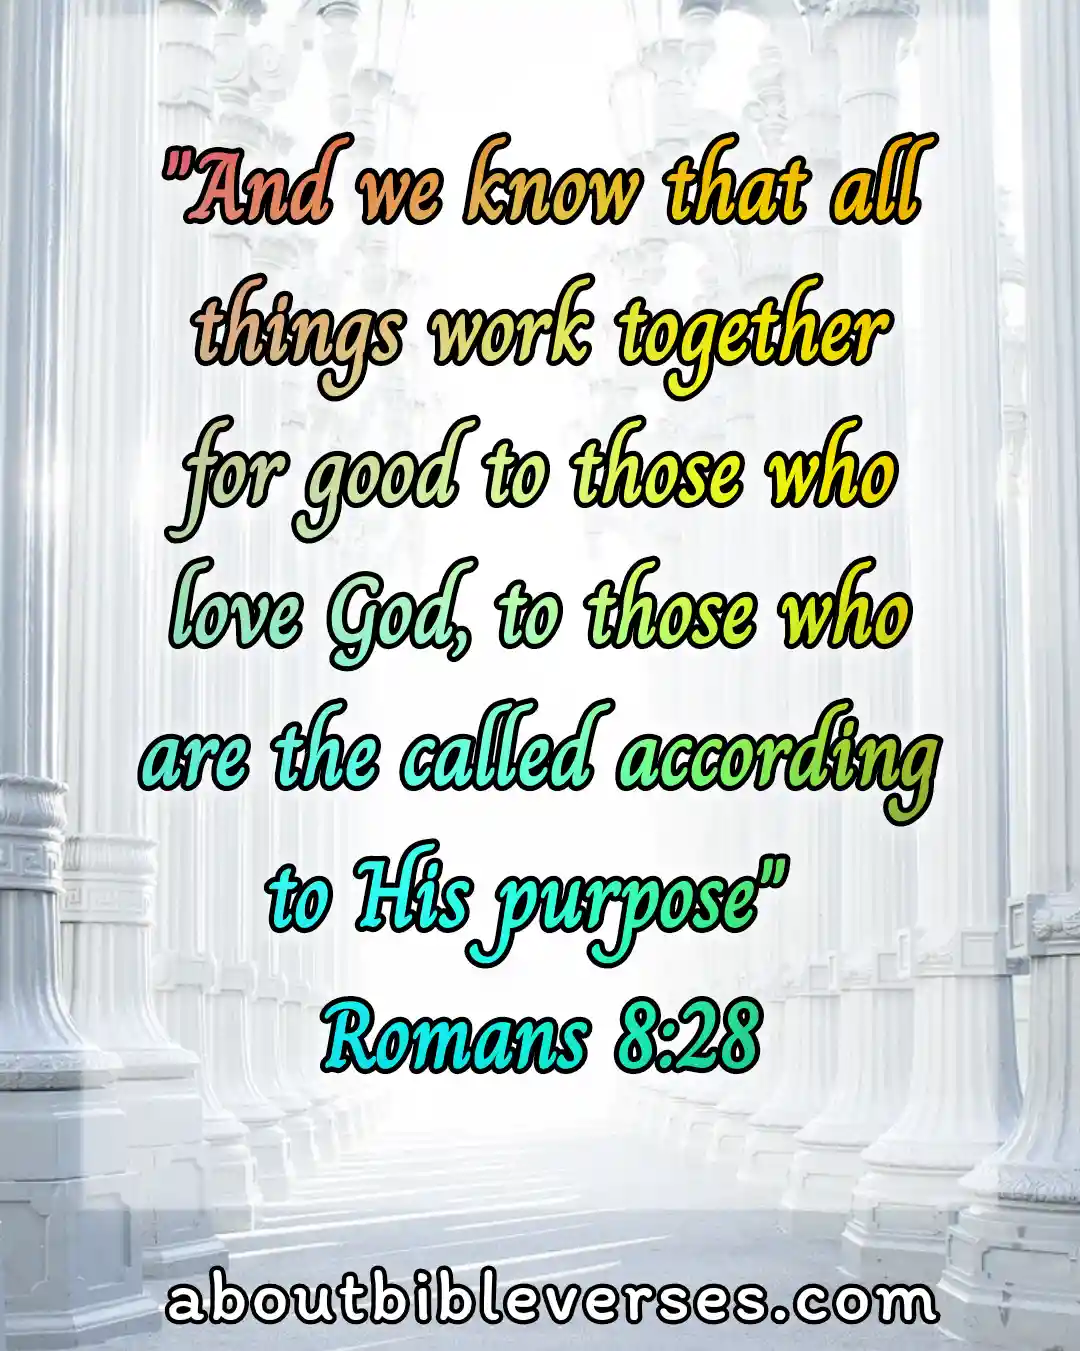 Bible Verses About Partnership With God (Romans 8:28)